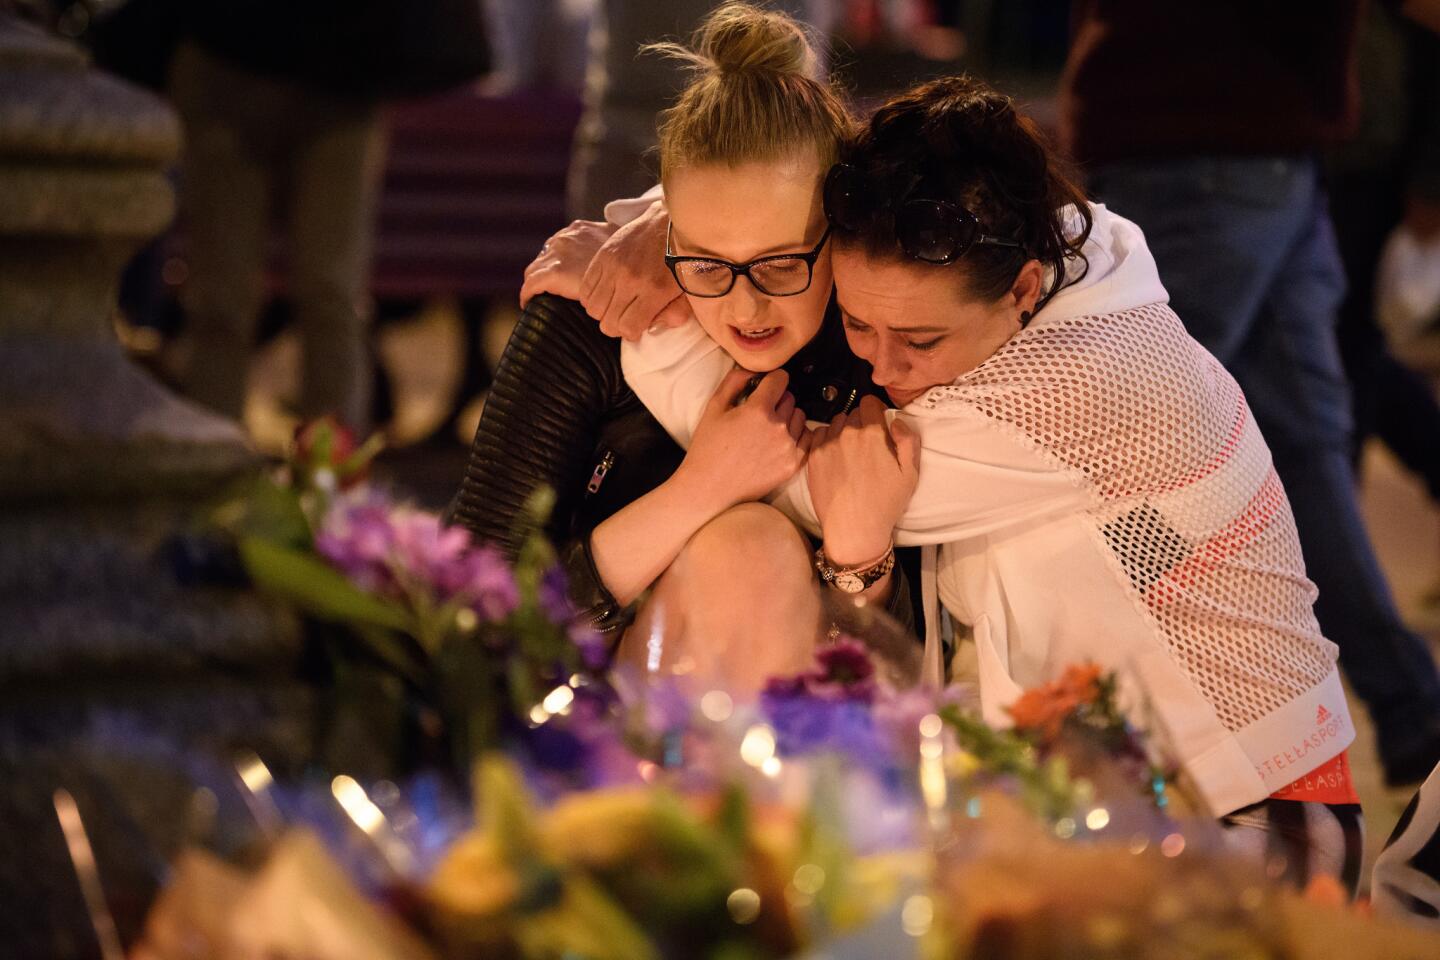 A woman is consoled as she looks at the floral tributes after an evening vigil outside the Town Hall on May 23, 2017, in Manchester, England. An explosion occurred at Manchester Arena as concertgoers were leaving an Ariana Grande performance.